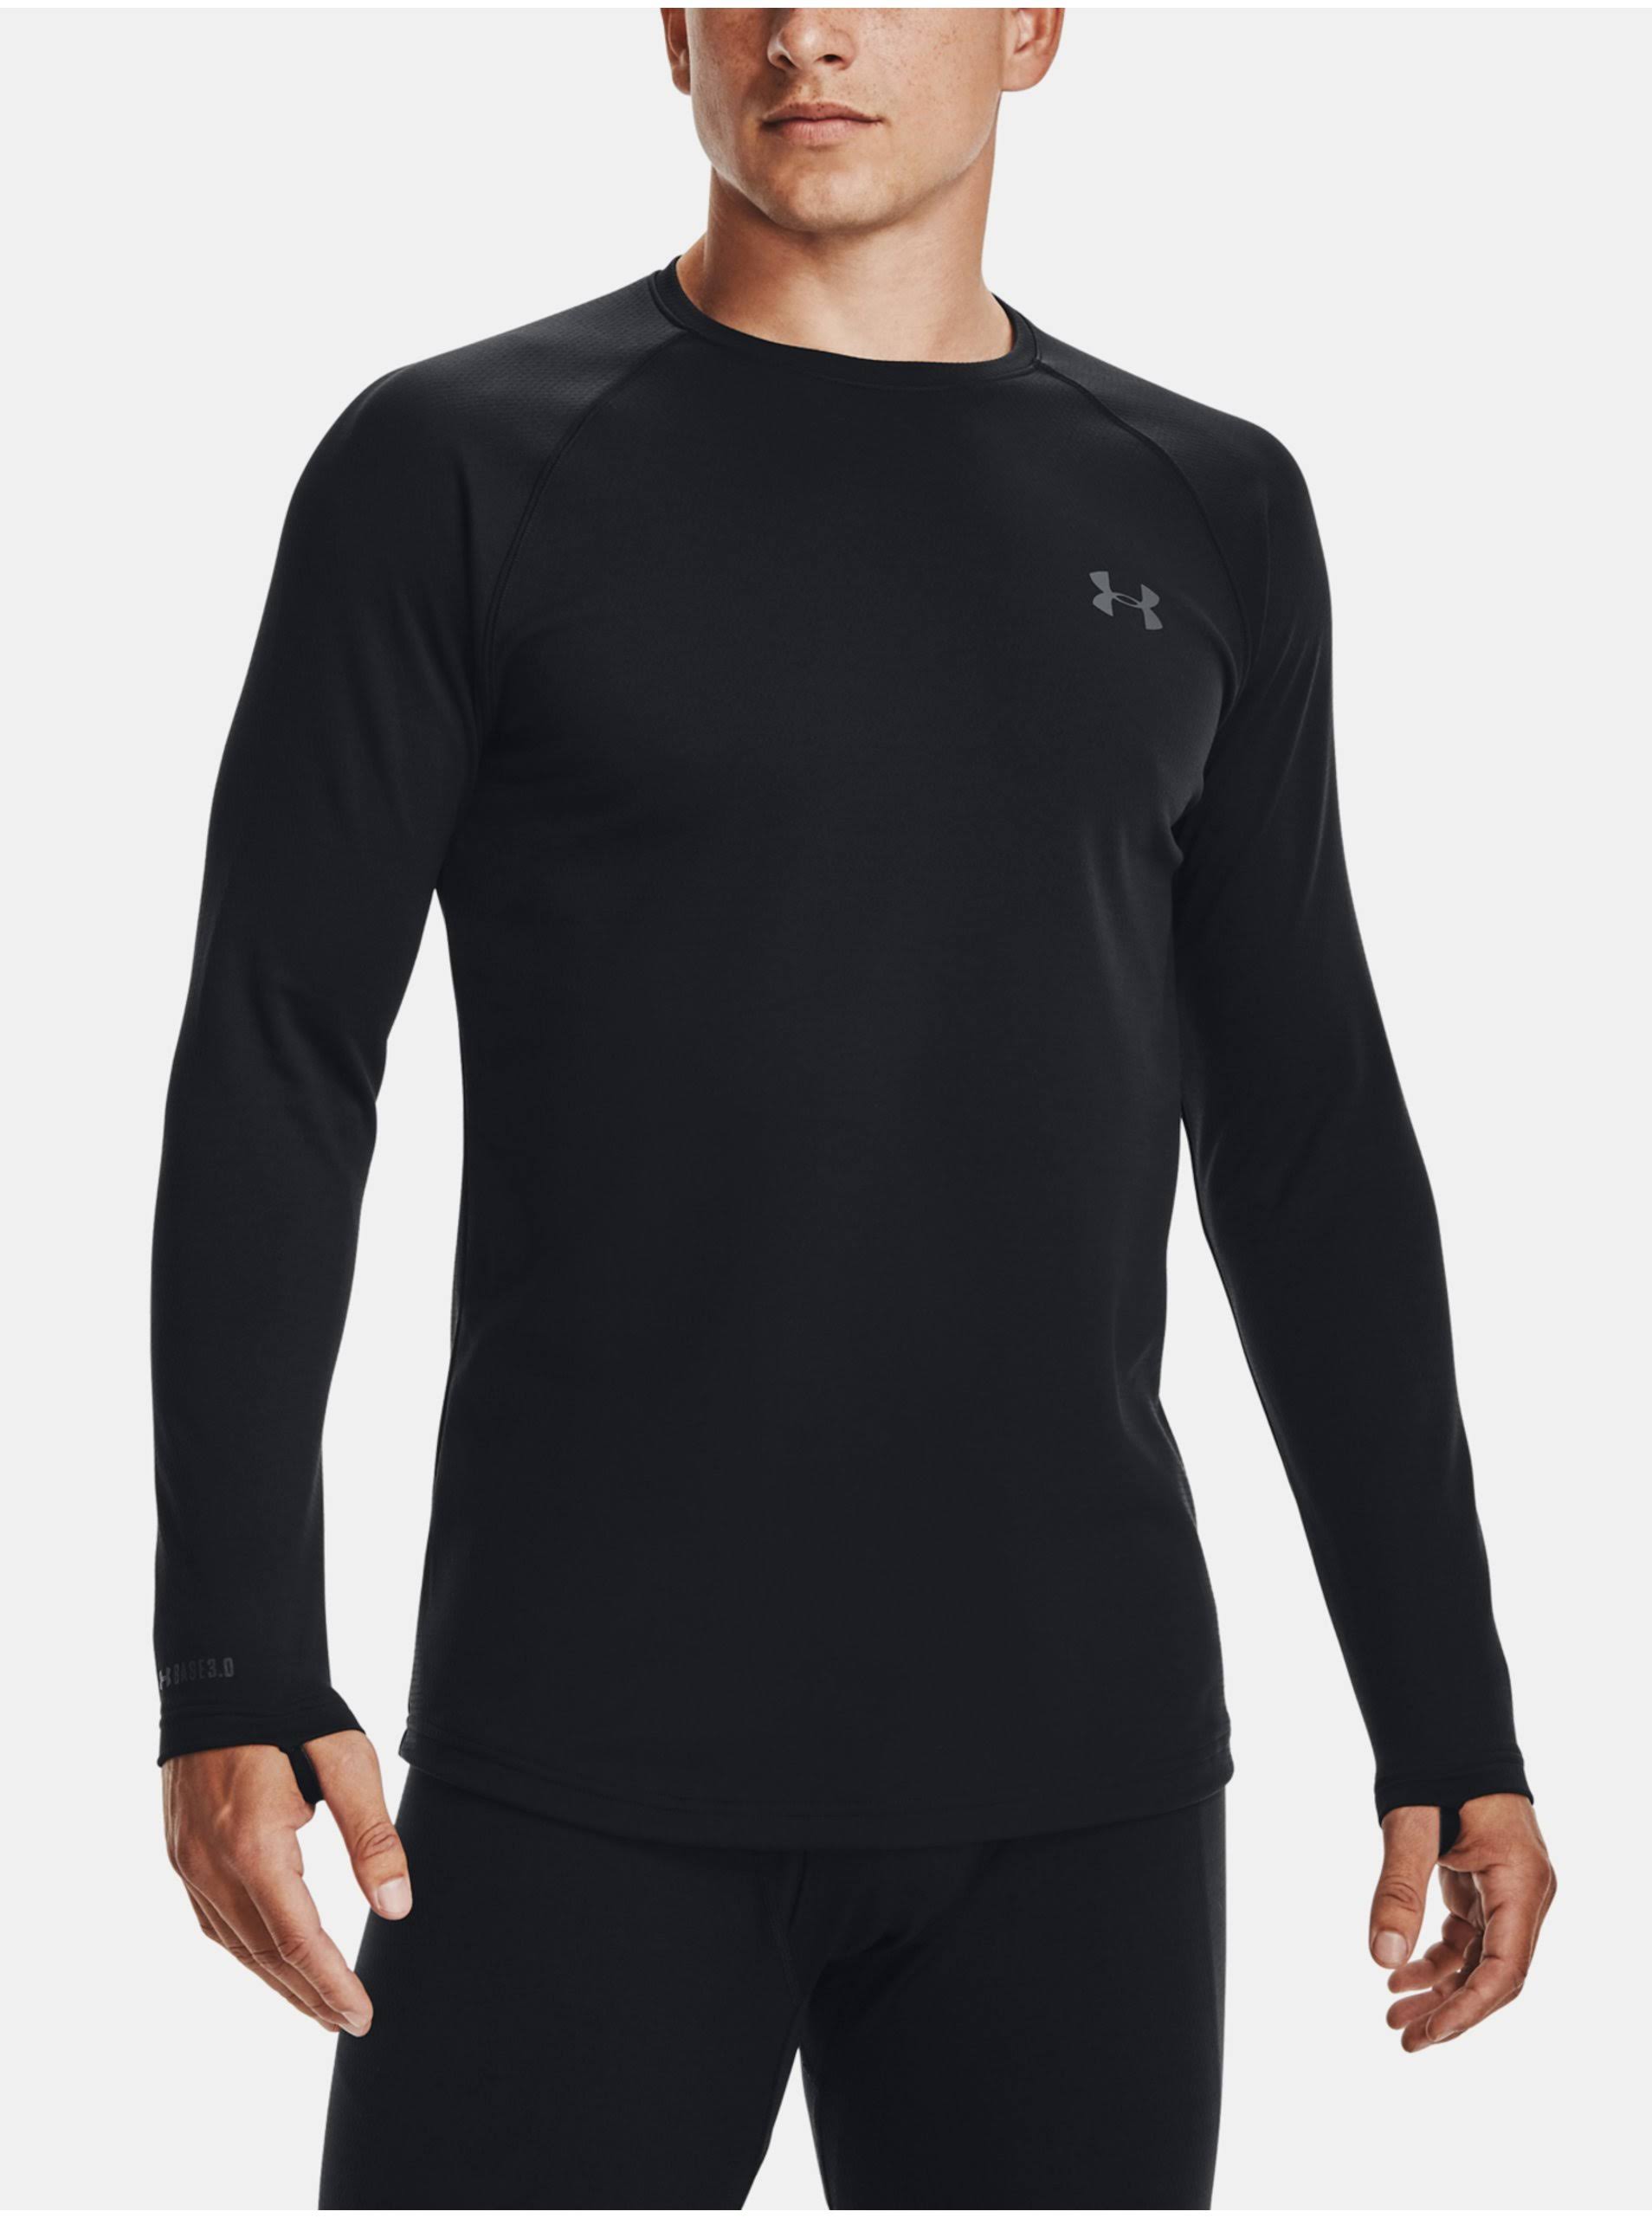 Under Armour Men's Packaged Base 3.0 Crew